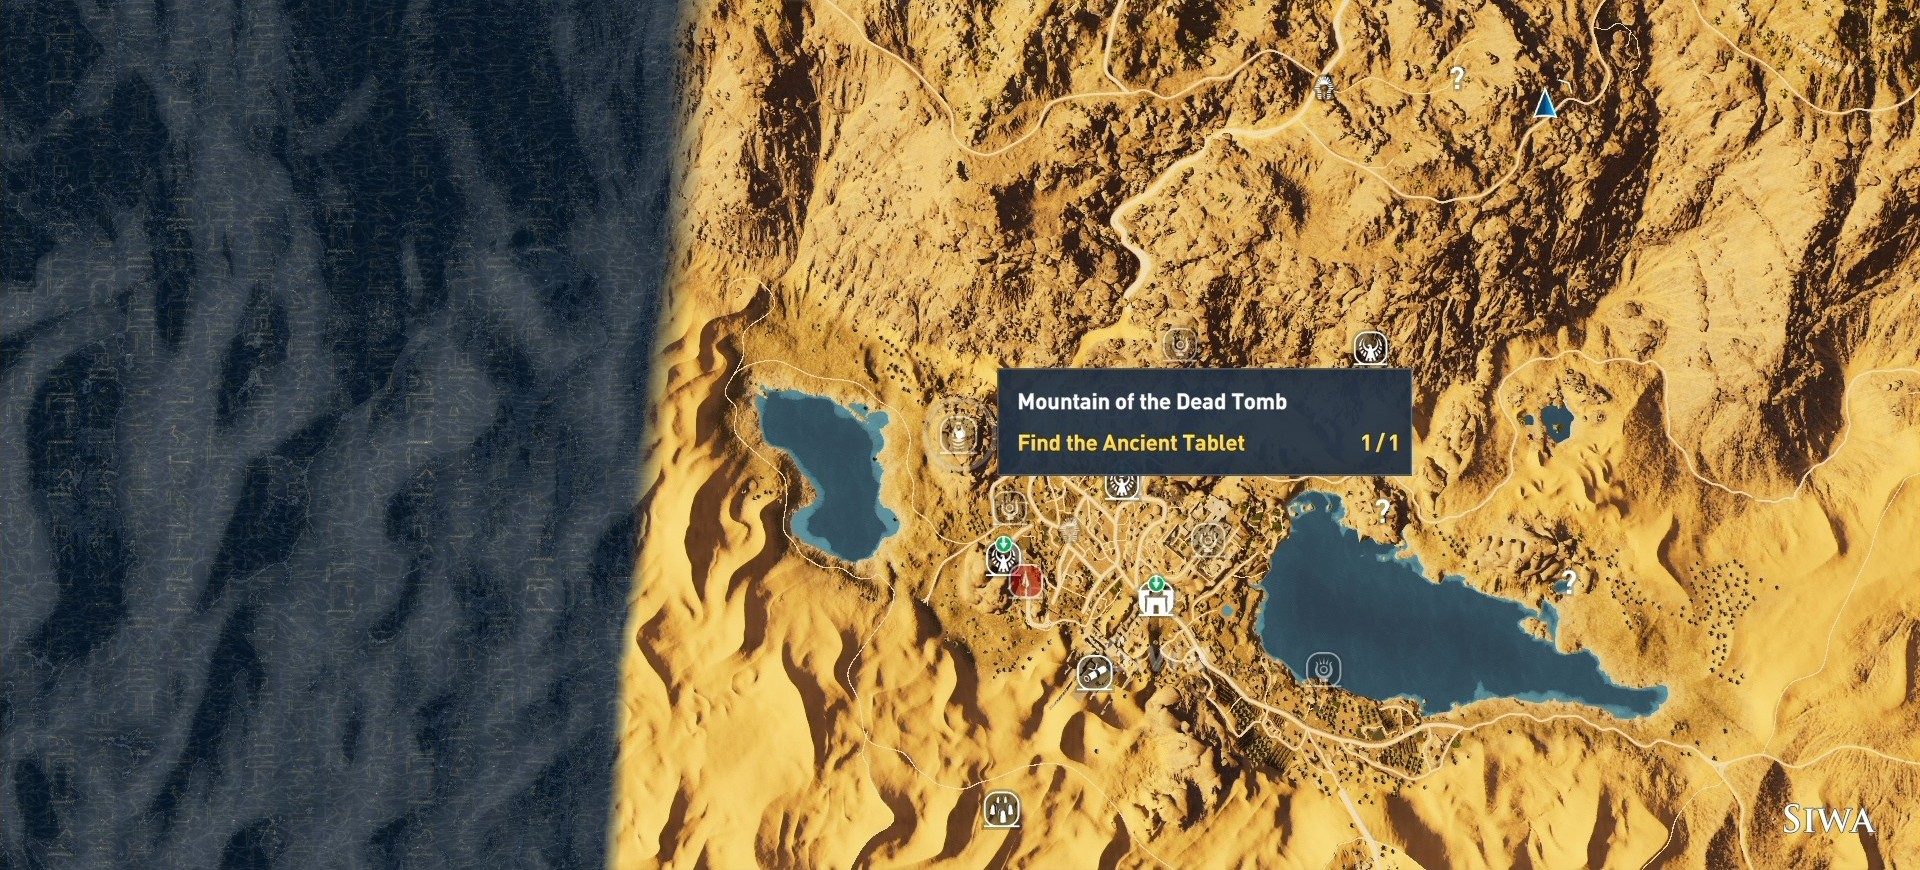 Trophies in Assassin's Creed Origins - Assassin's Creed Origins Guide